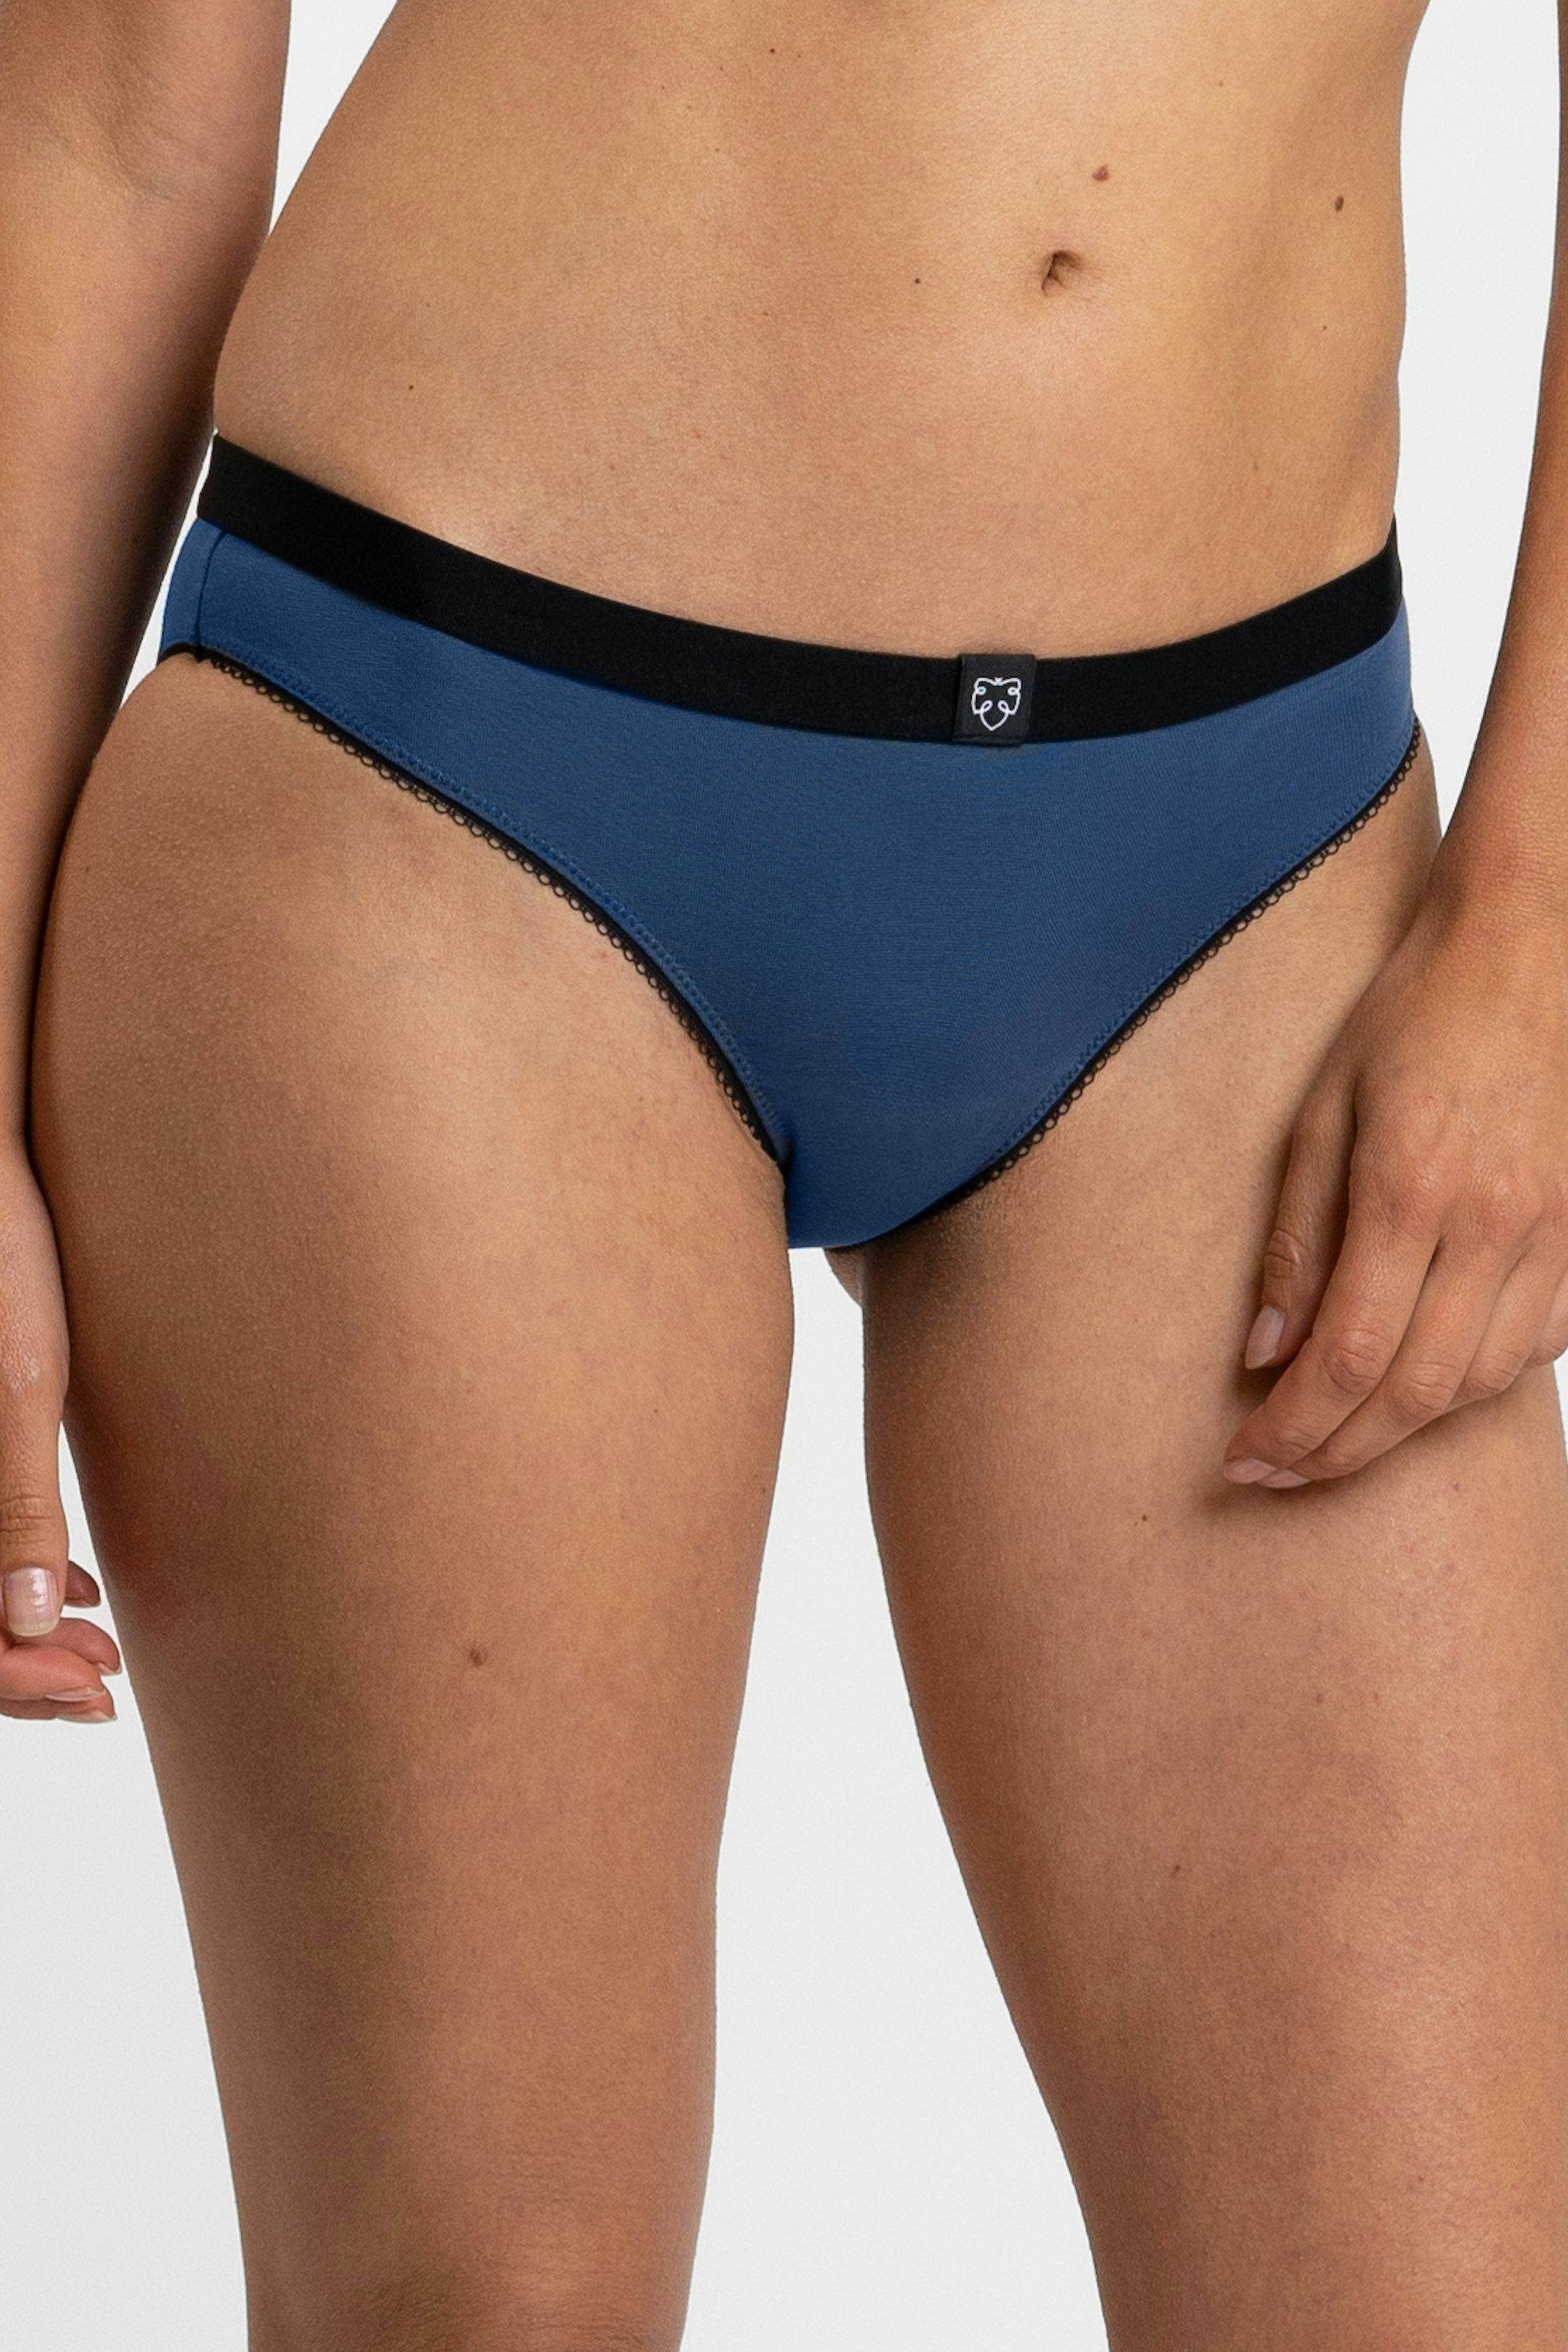 A-dam women's solid blue brief from GOTS pure organic cotton